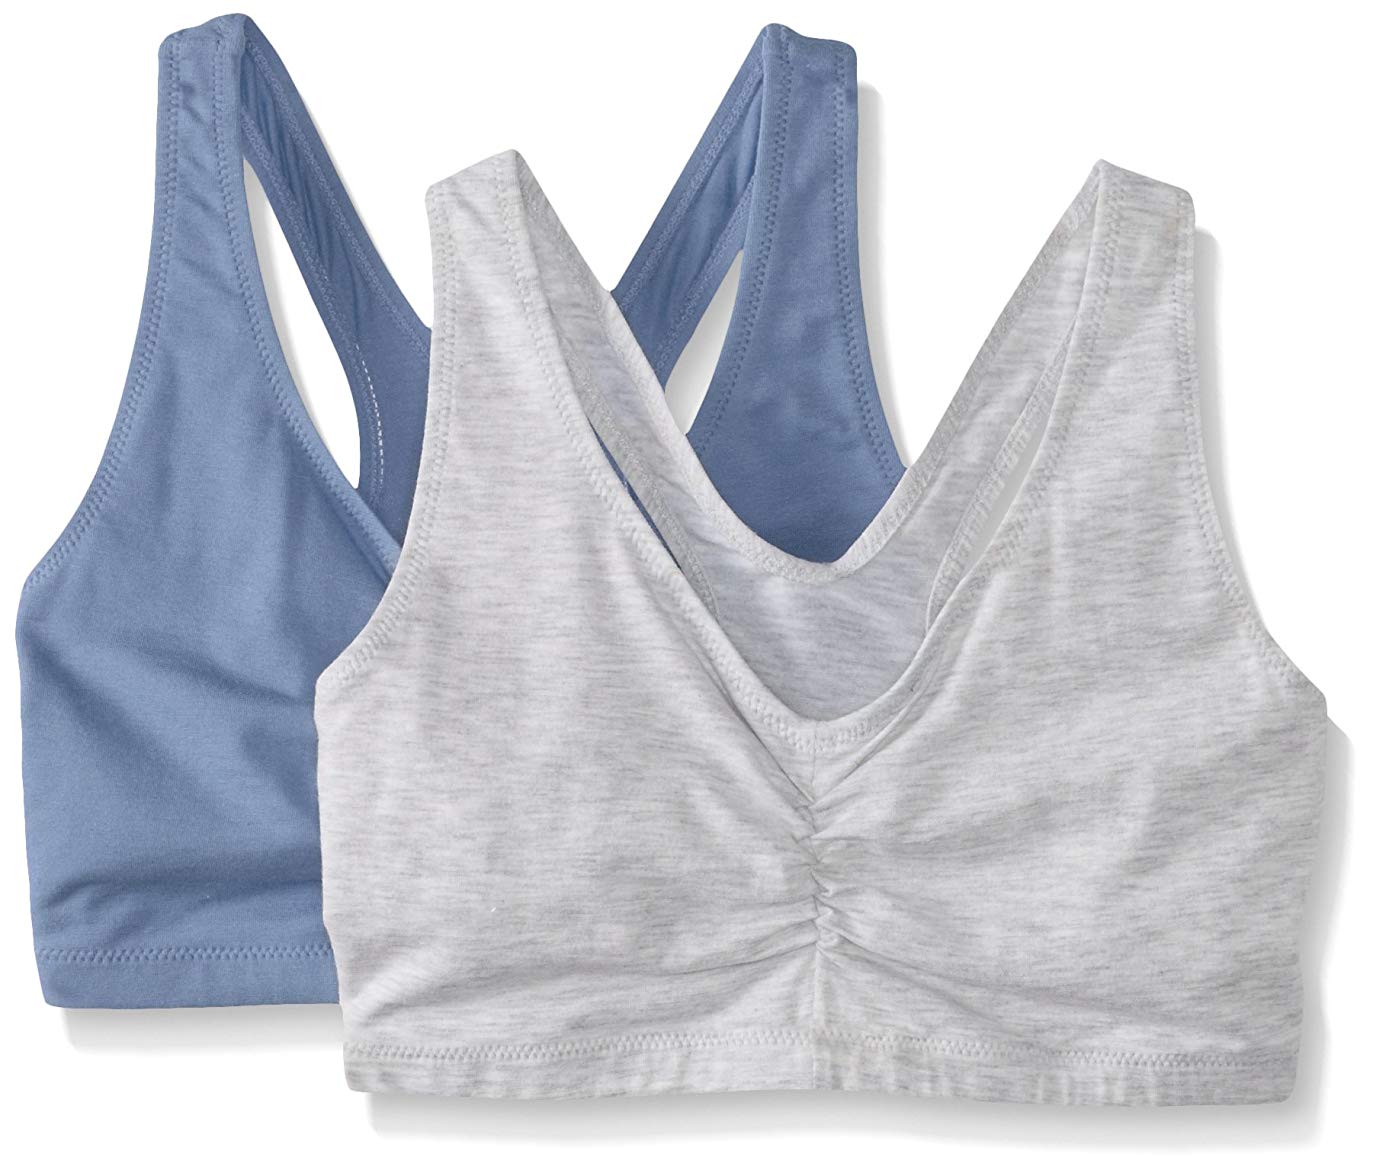 Hanes Womens Invisible Embrace Moisture Wicking Pullover Bralette